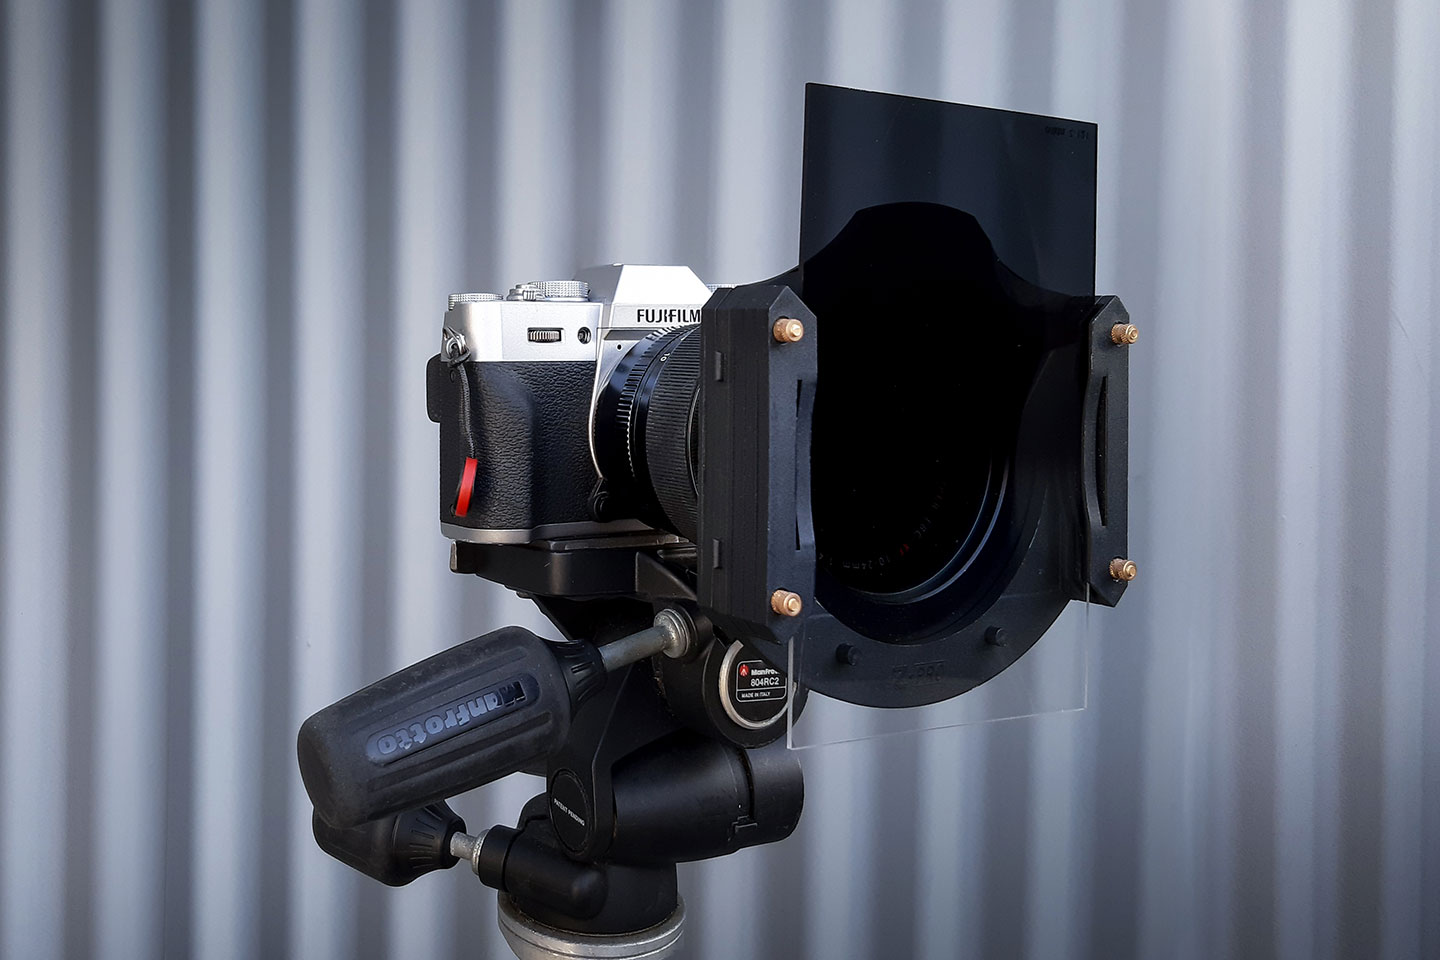 A mirrorless camera mounted on a tripod with a graduated neutral density filter attached to the front. A great addition to any photography equipment list.